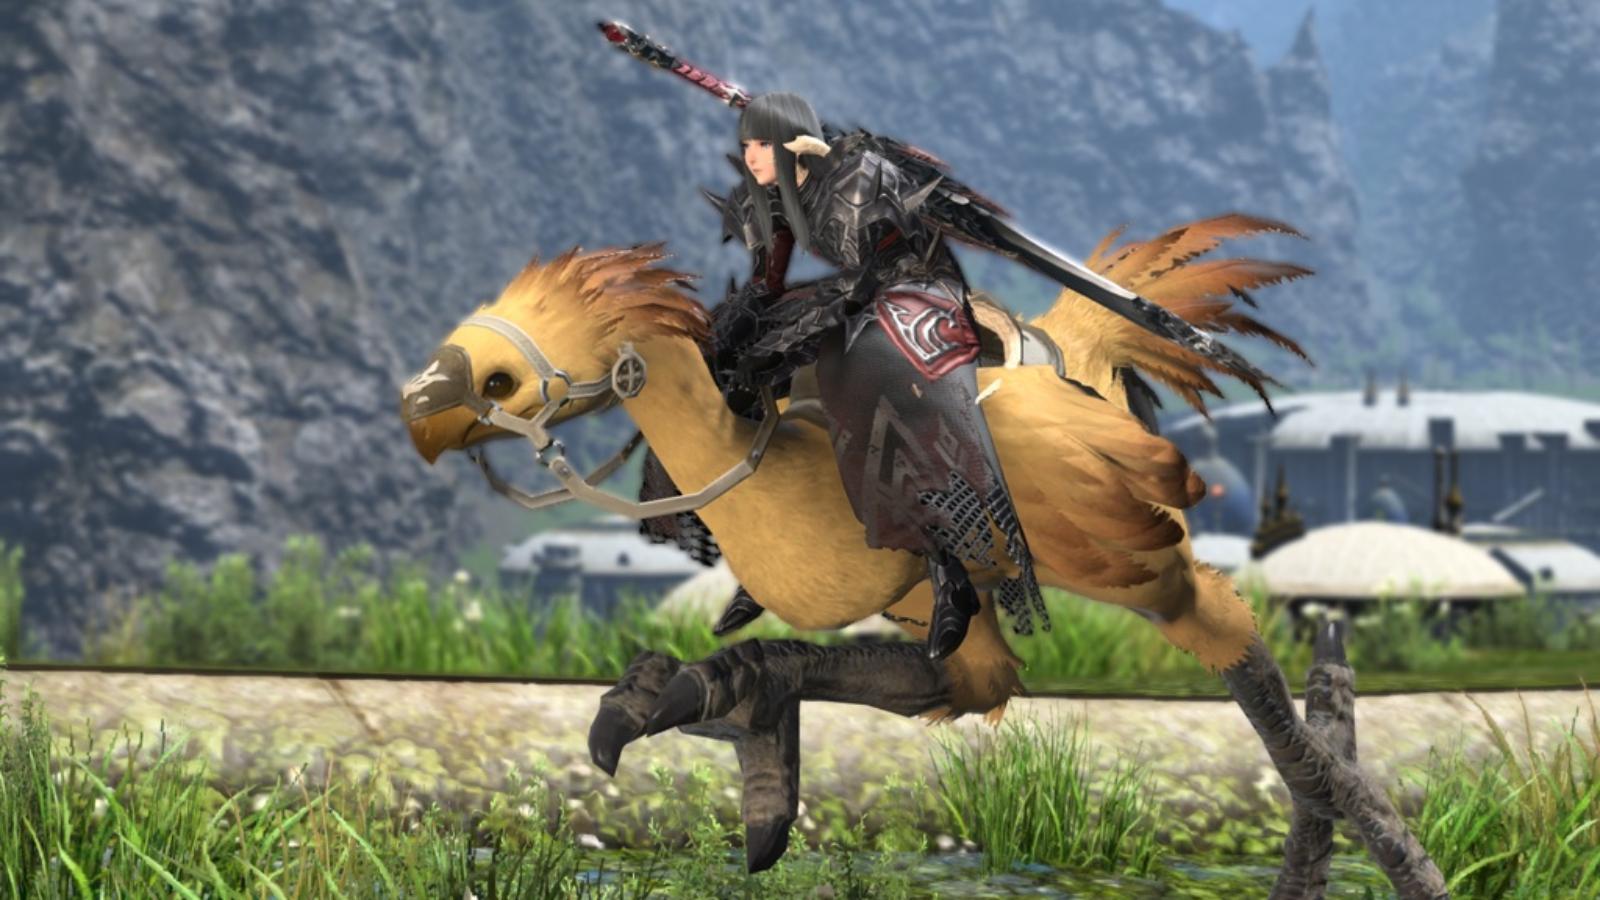 A player riding a Chocobo in FFXIV.